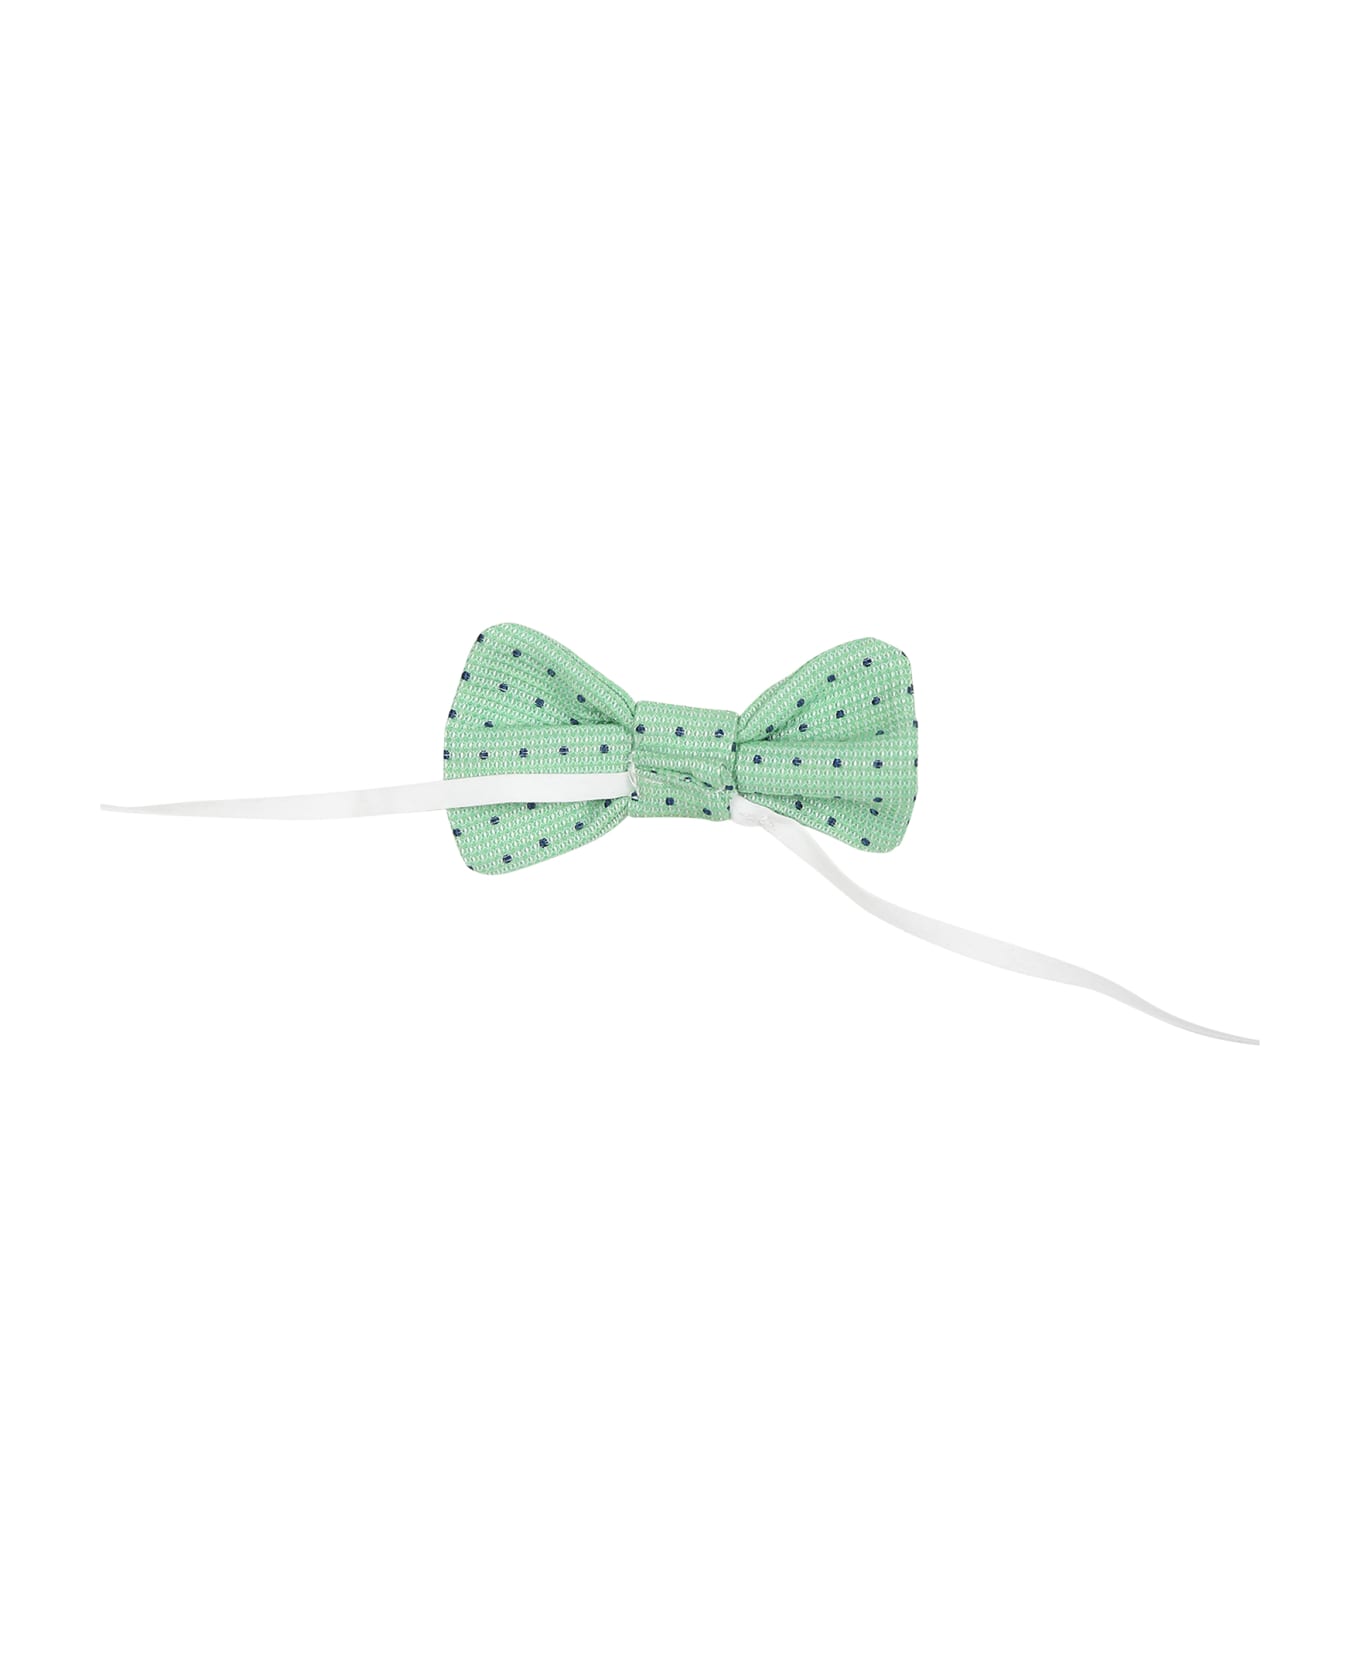 La stupenderia Green Bow Tie For Bbay Boy With Polka Dots - Green